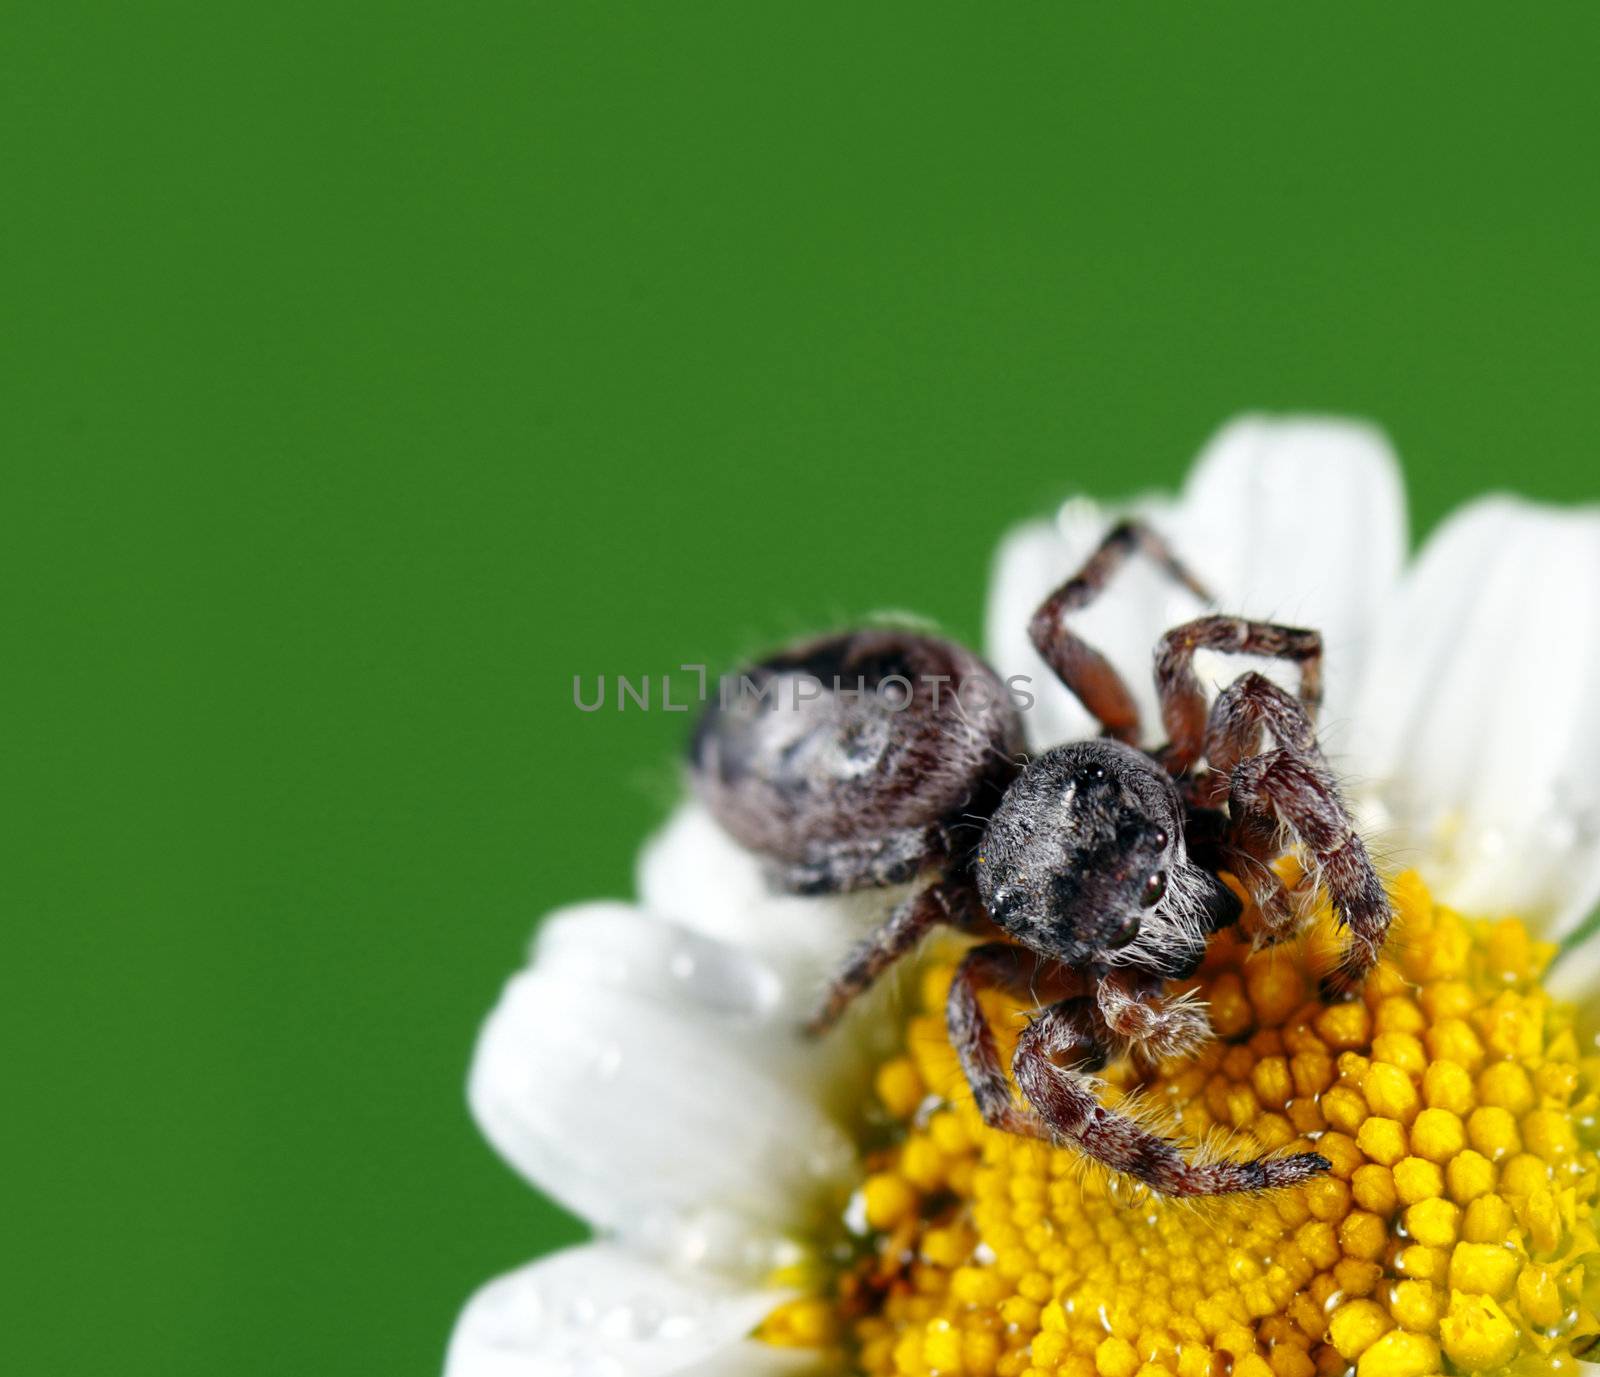 A macro shot of a jumping spider on a flower. This tiny little guys was less than a quarter inch long. Known for their eye patterns and jumping capabilities, jumping spiders have been known to jump 80 times their body length in distance.